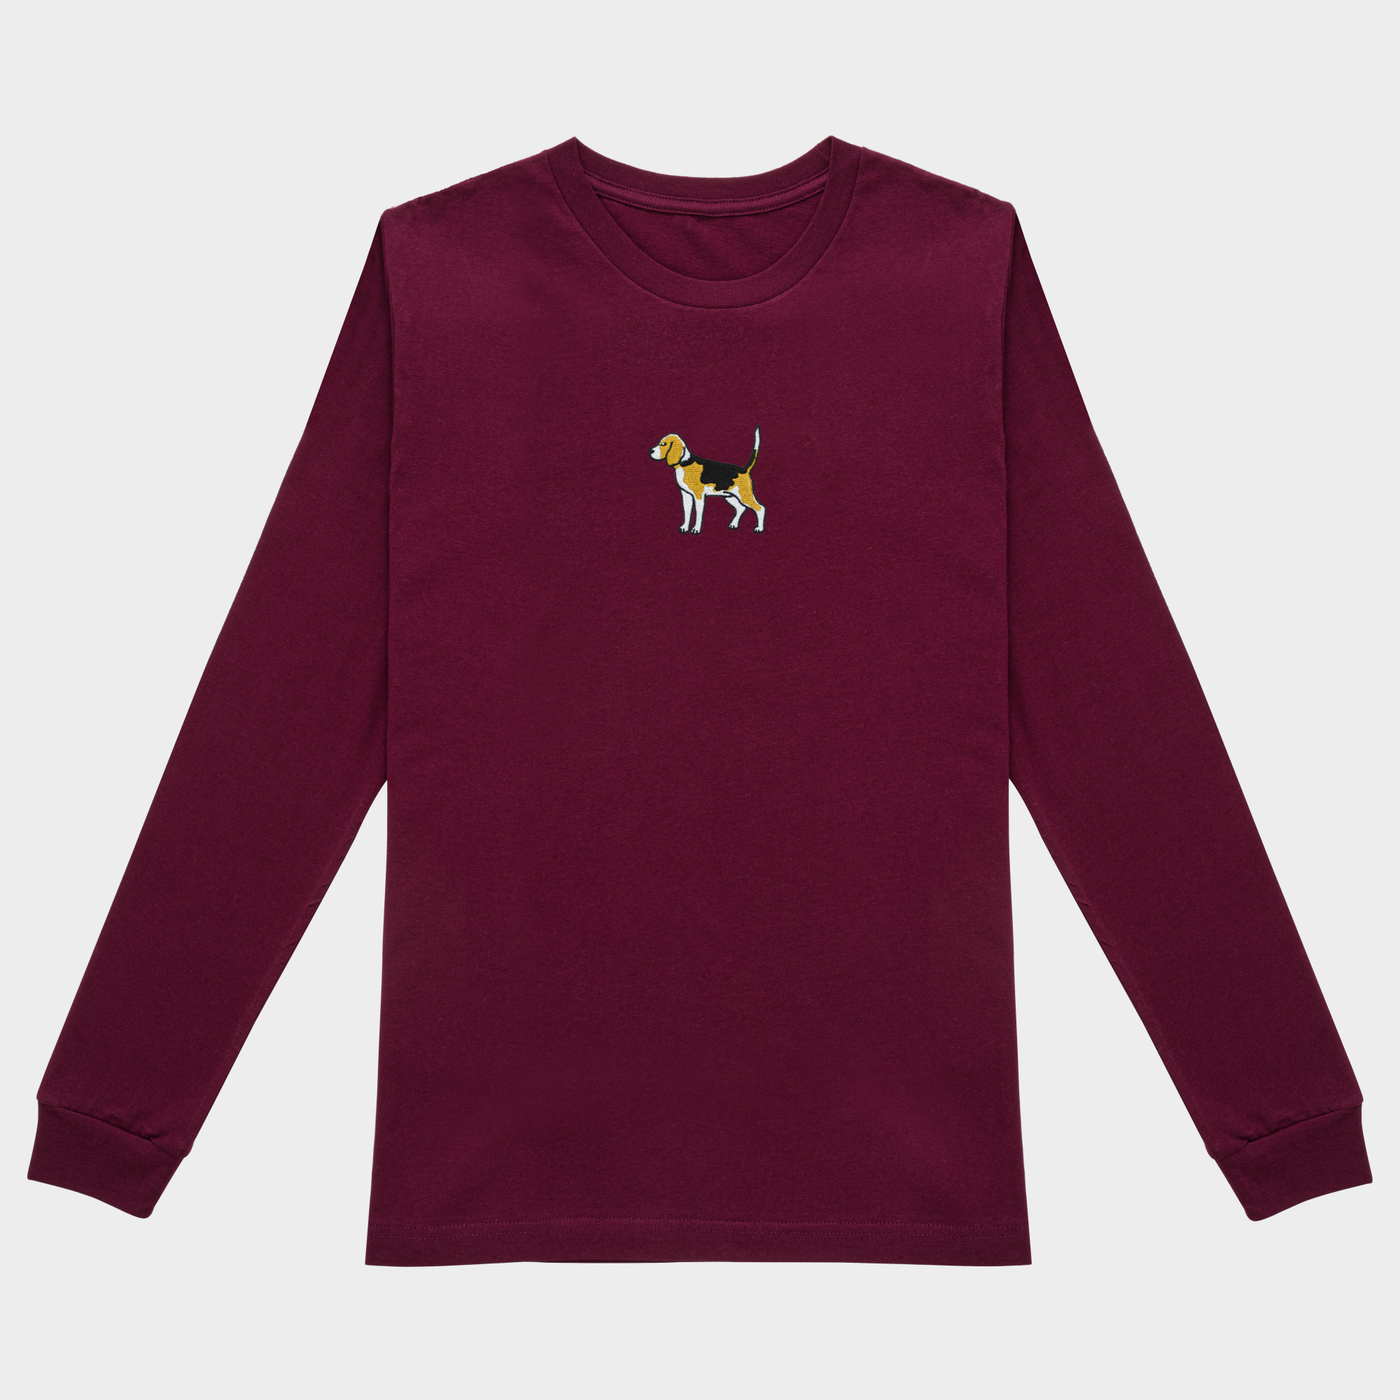 Bobby's Planet Men's Embroidered Beagle Long Sleeve Shirt from Paws Dog Cat Animals Collection in Maroon Color#color_maroon